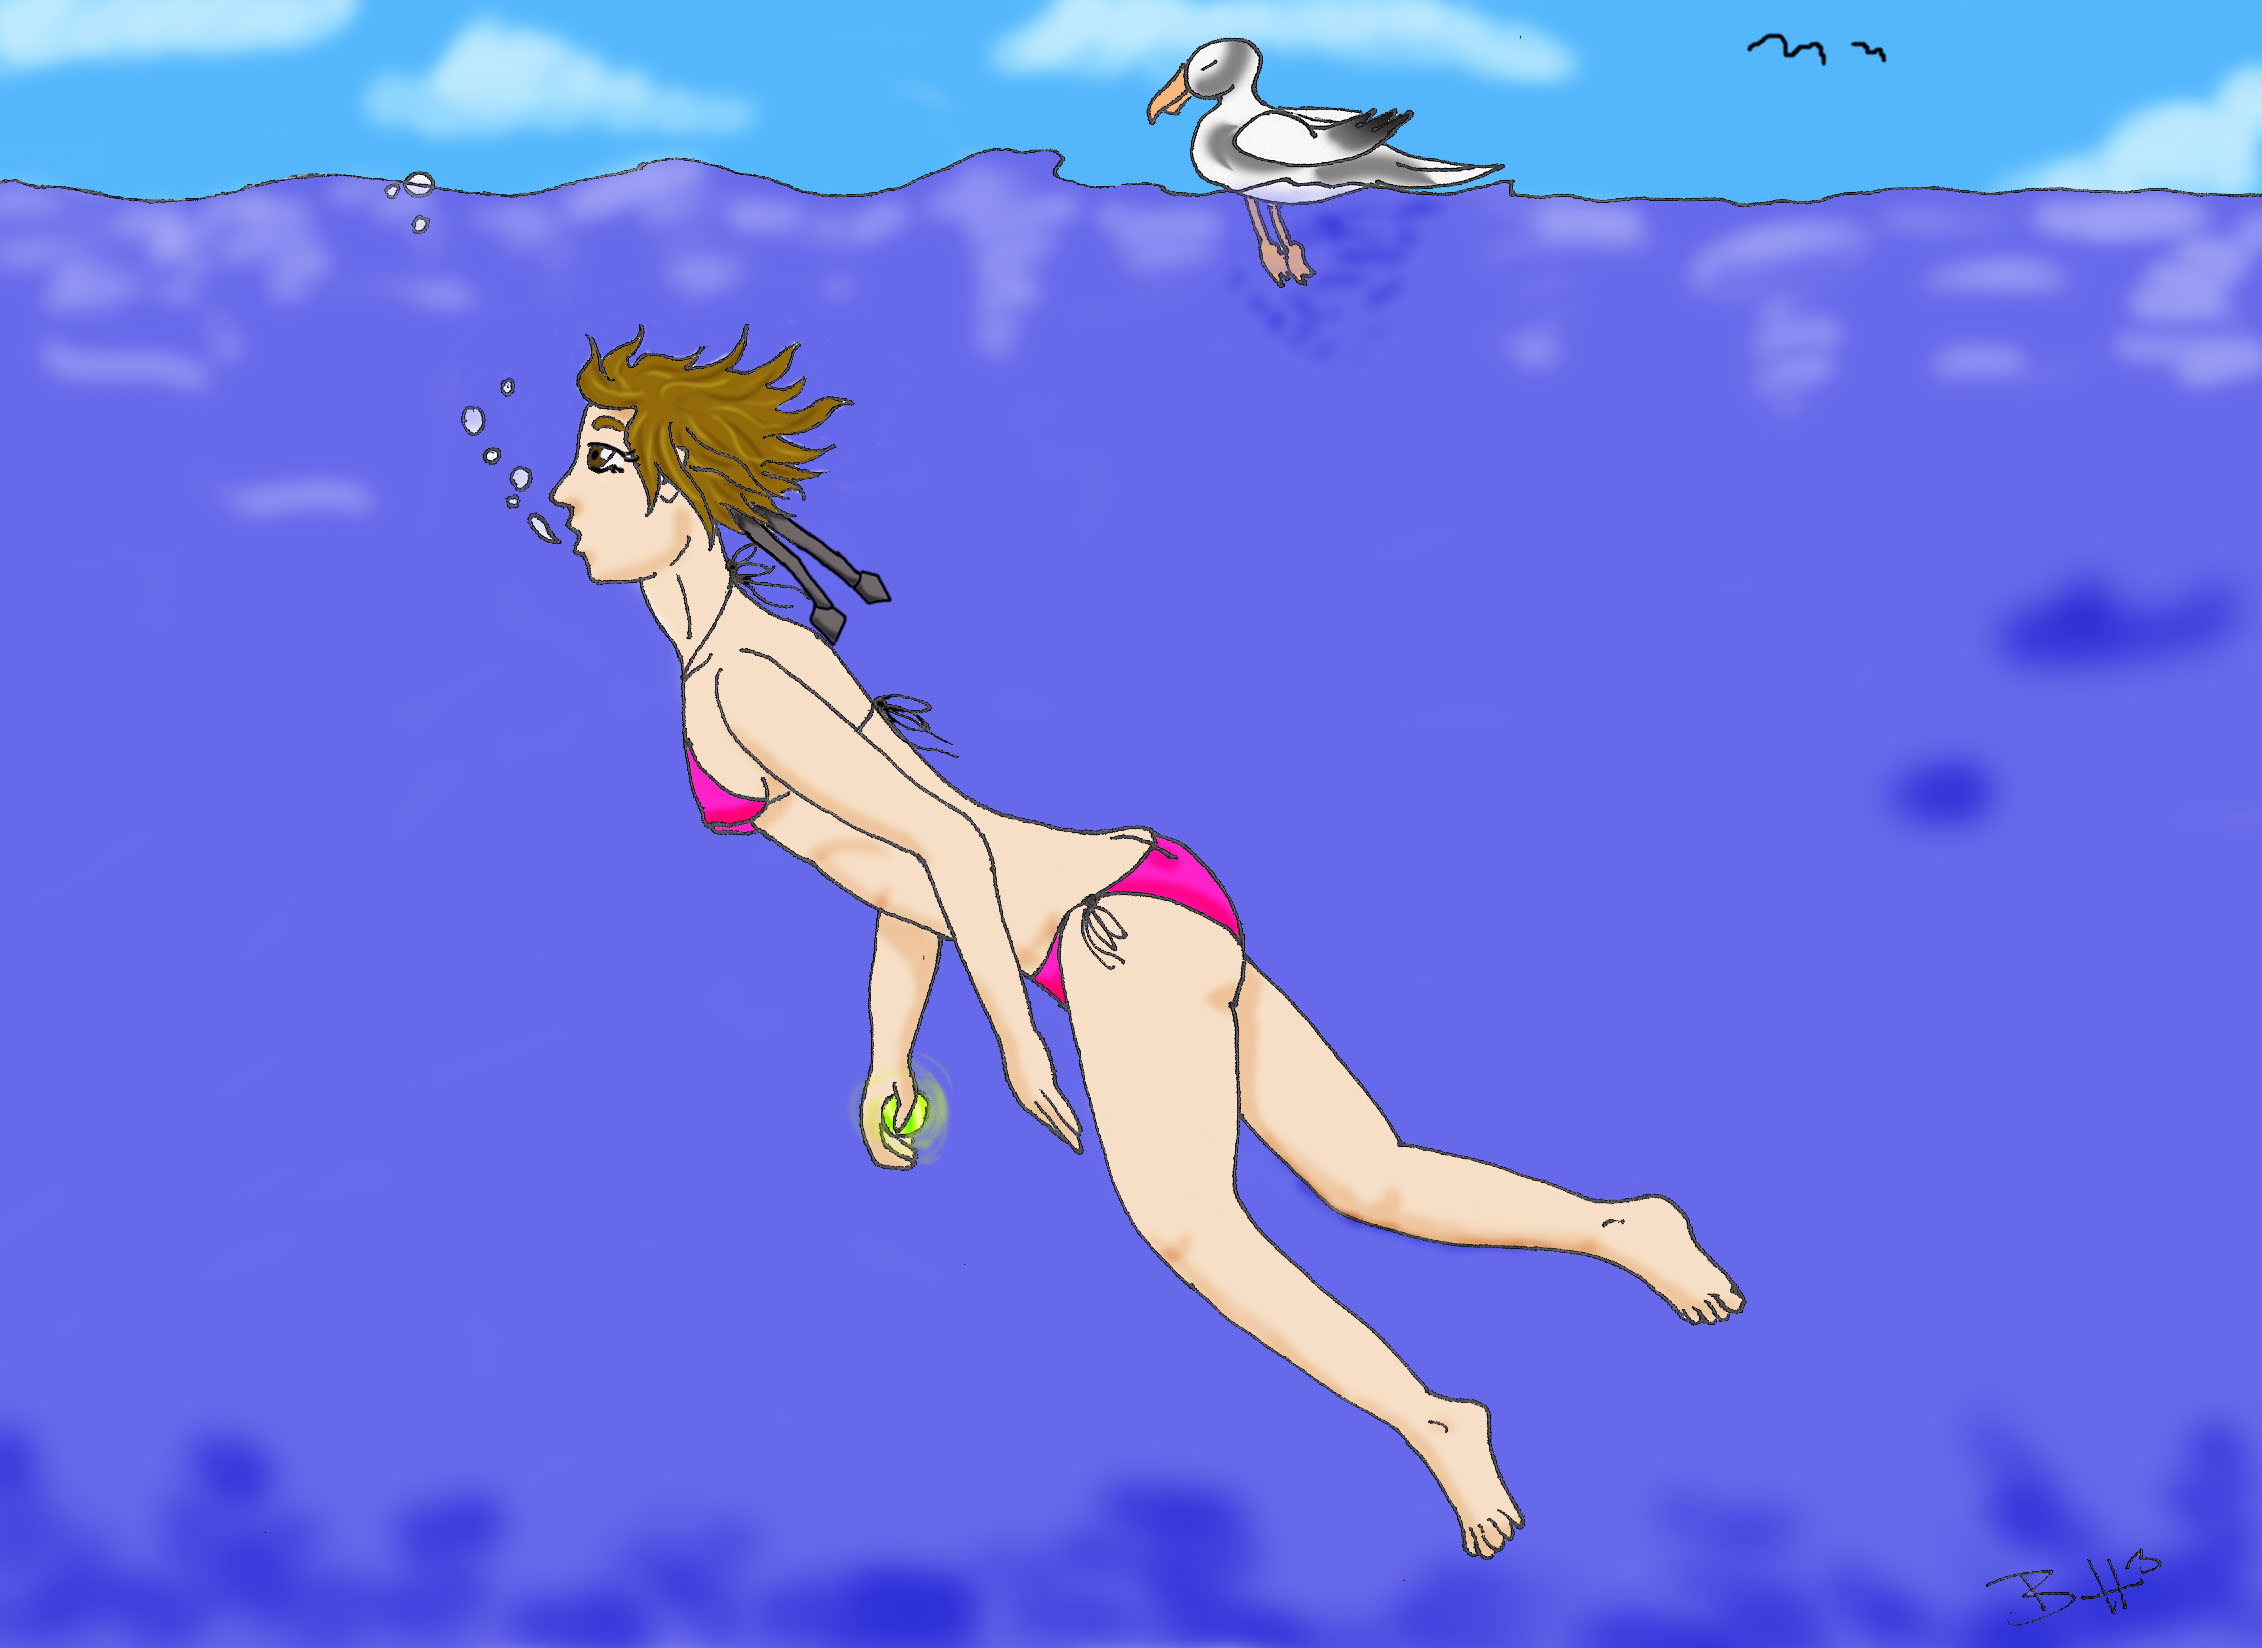 yuffie swimming request by humletrold